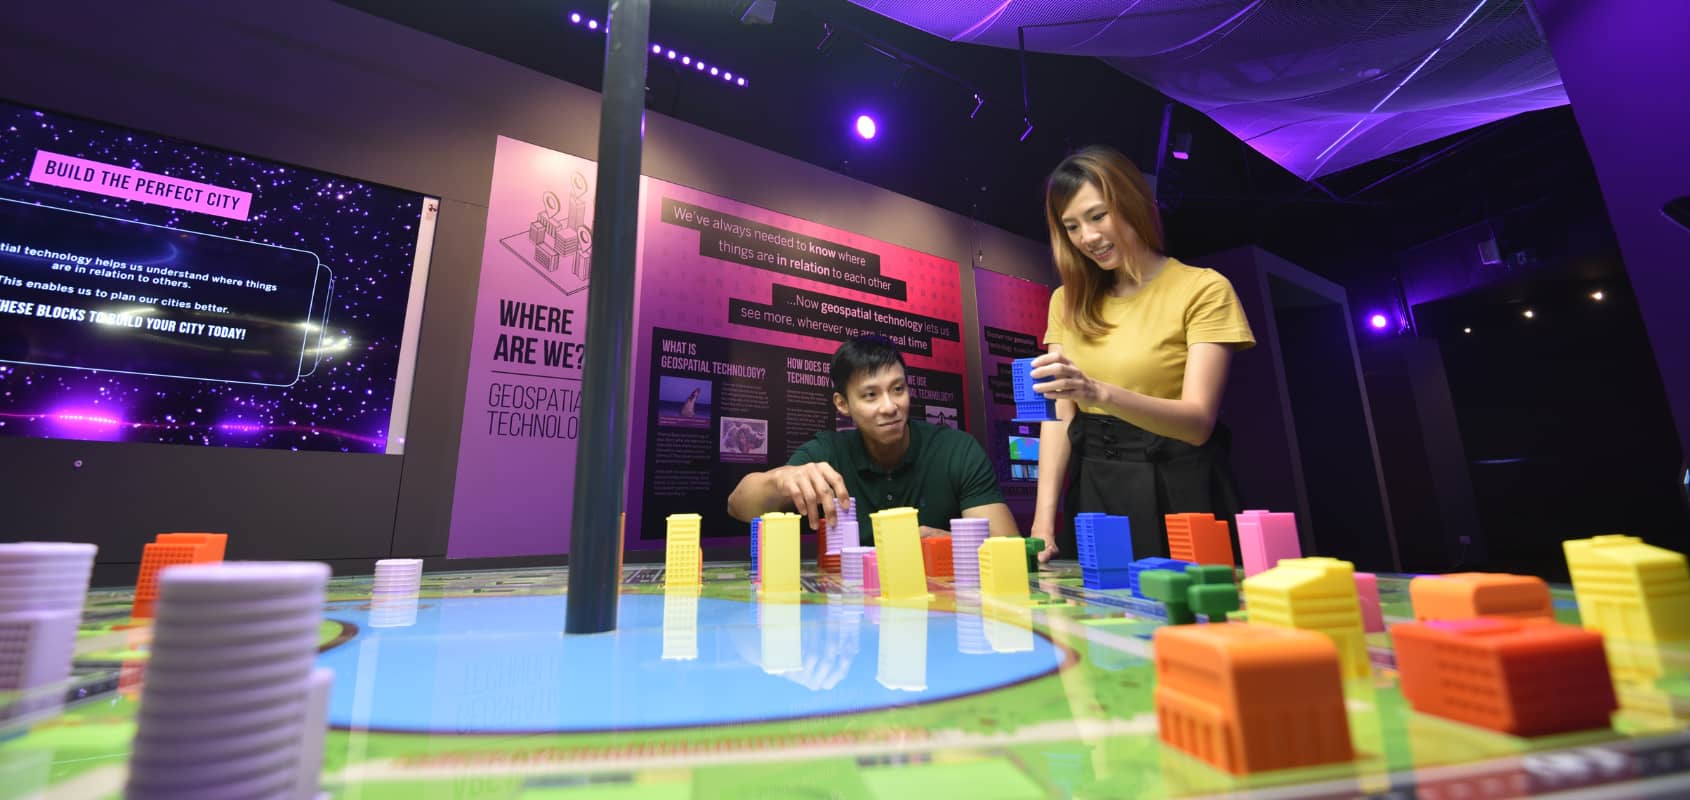 Smart Nation playscape exhibition at Science Centre